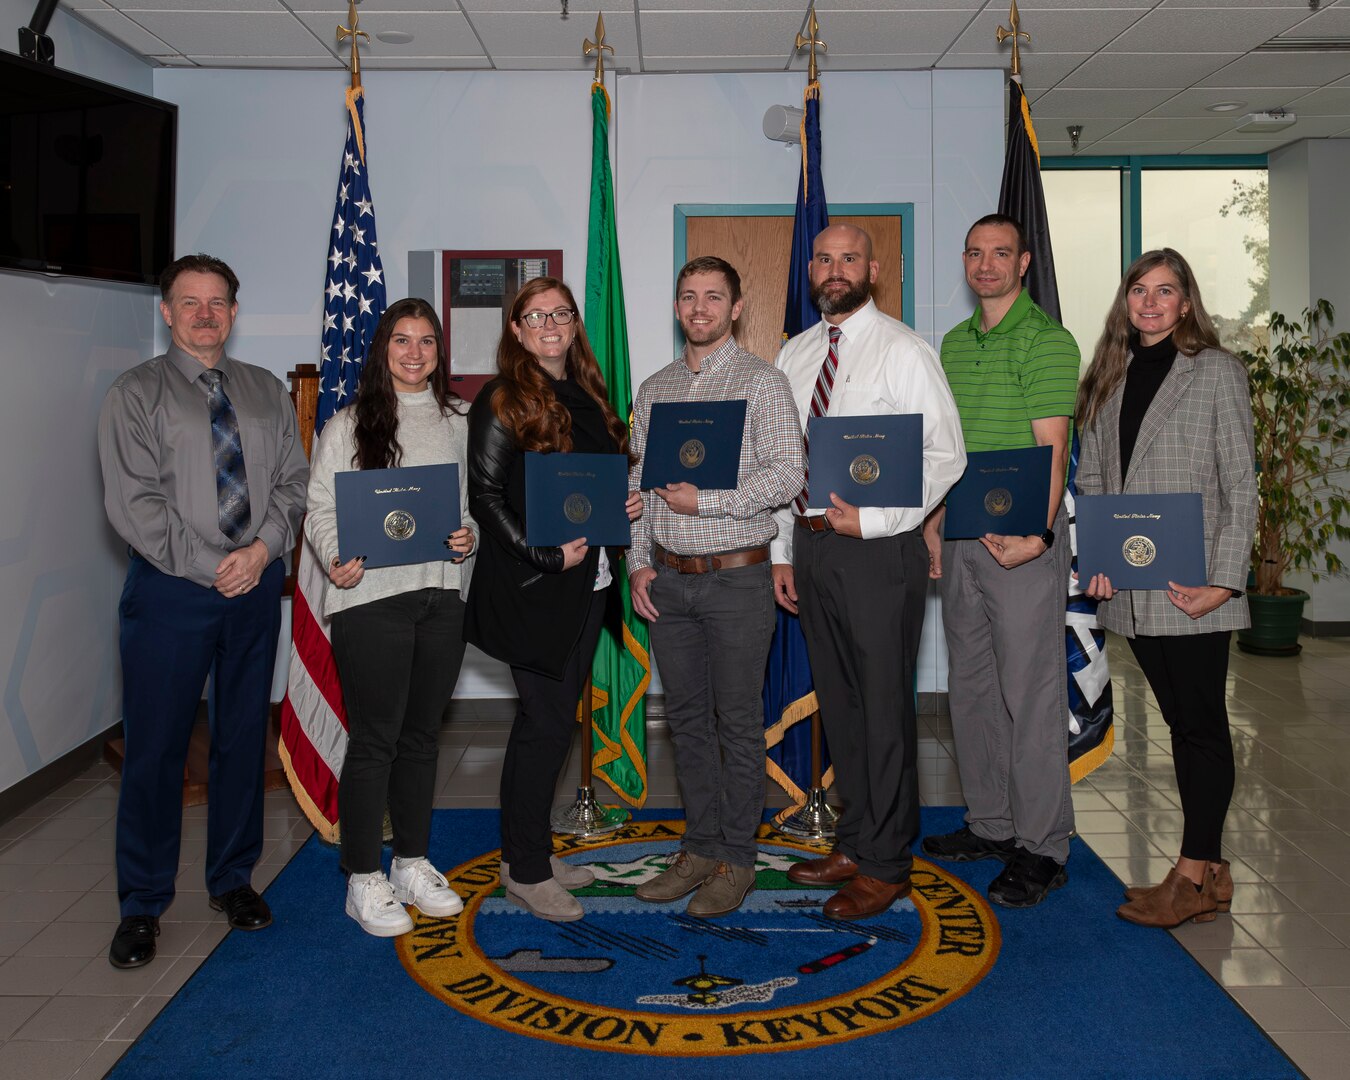 Naval Undersea Warfare Center Division, Keyport Deputy Technical Director Michael Slater celebrates with the inaugural graduates of the Naval Postgraduate School’s “Implementing Technology Change” certificate program.